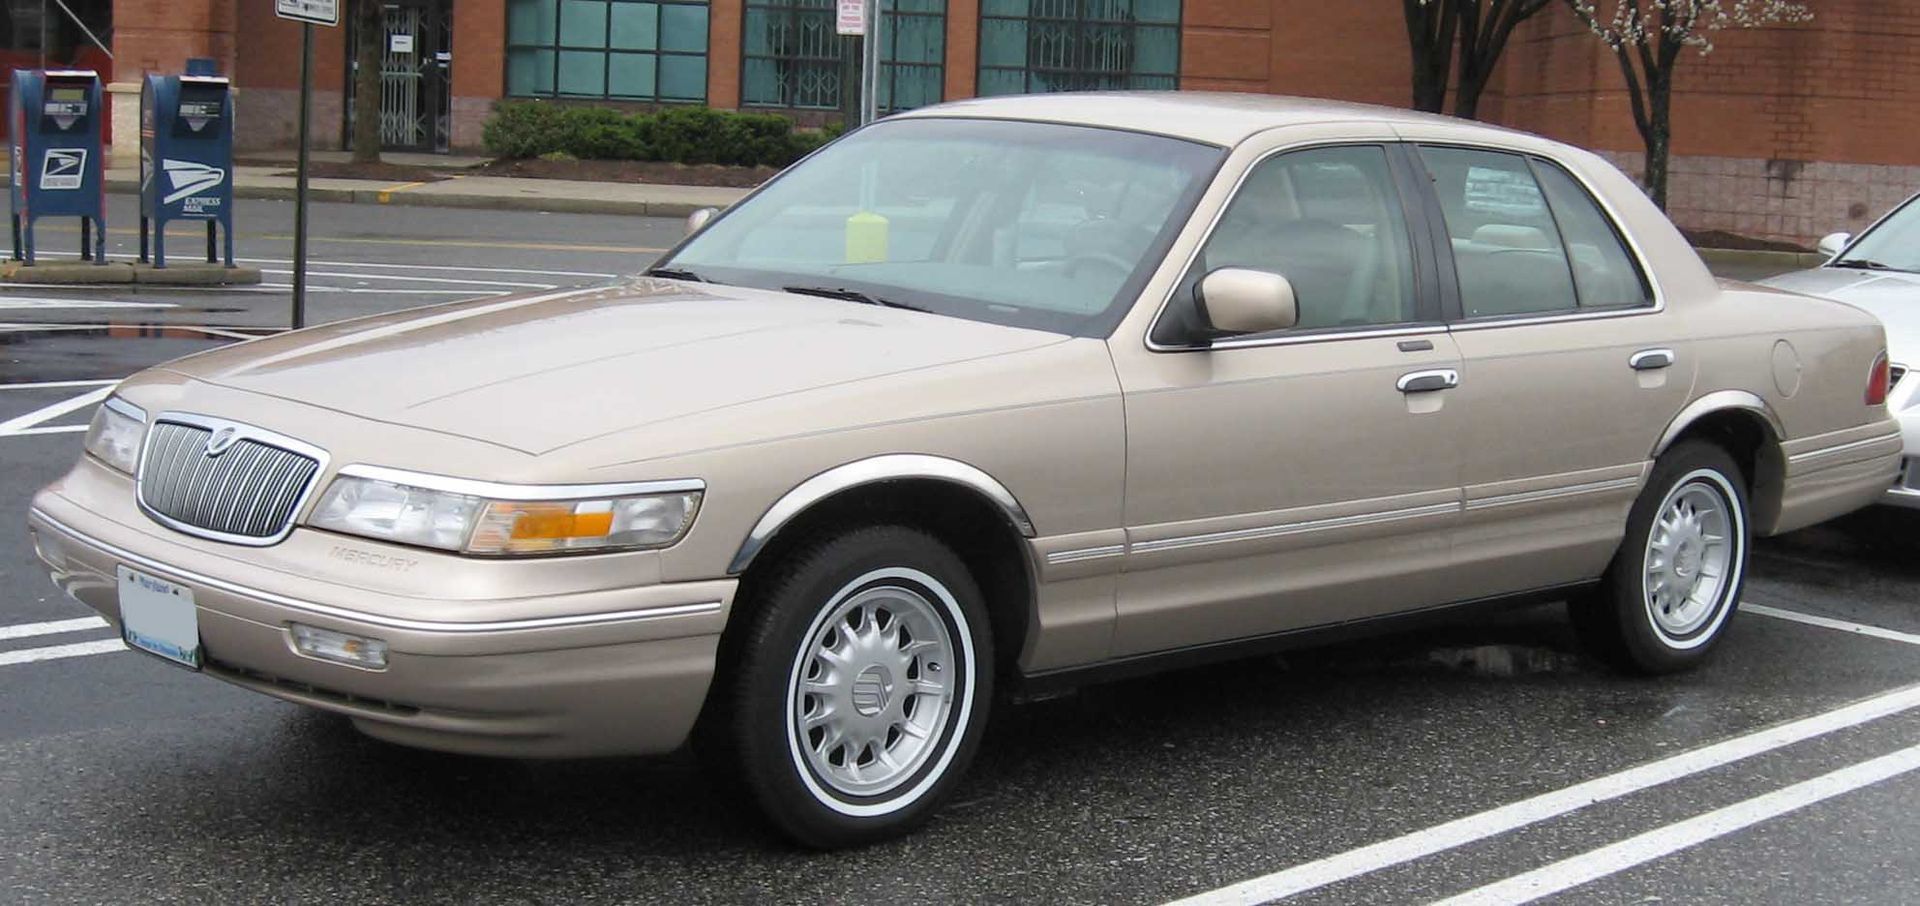 1995-97 Mercury Grand Marquis - Mercury Grand Marquis - Wikipedia | Ford,  Autos ford, Motores